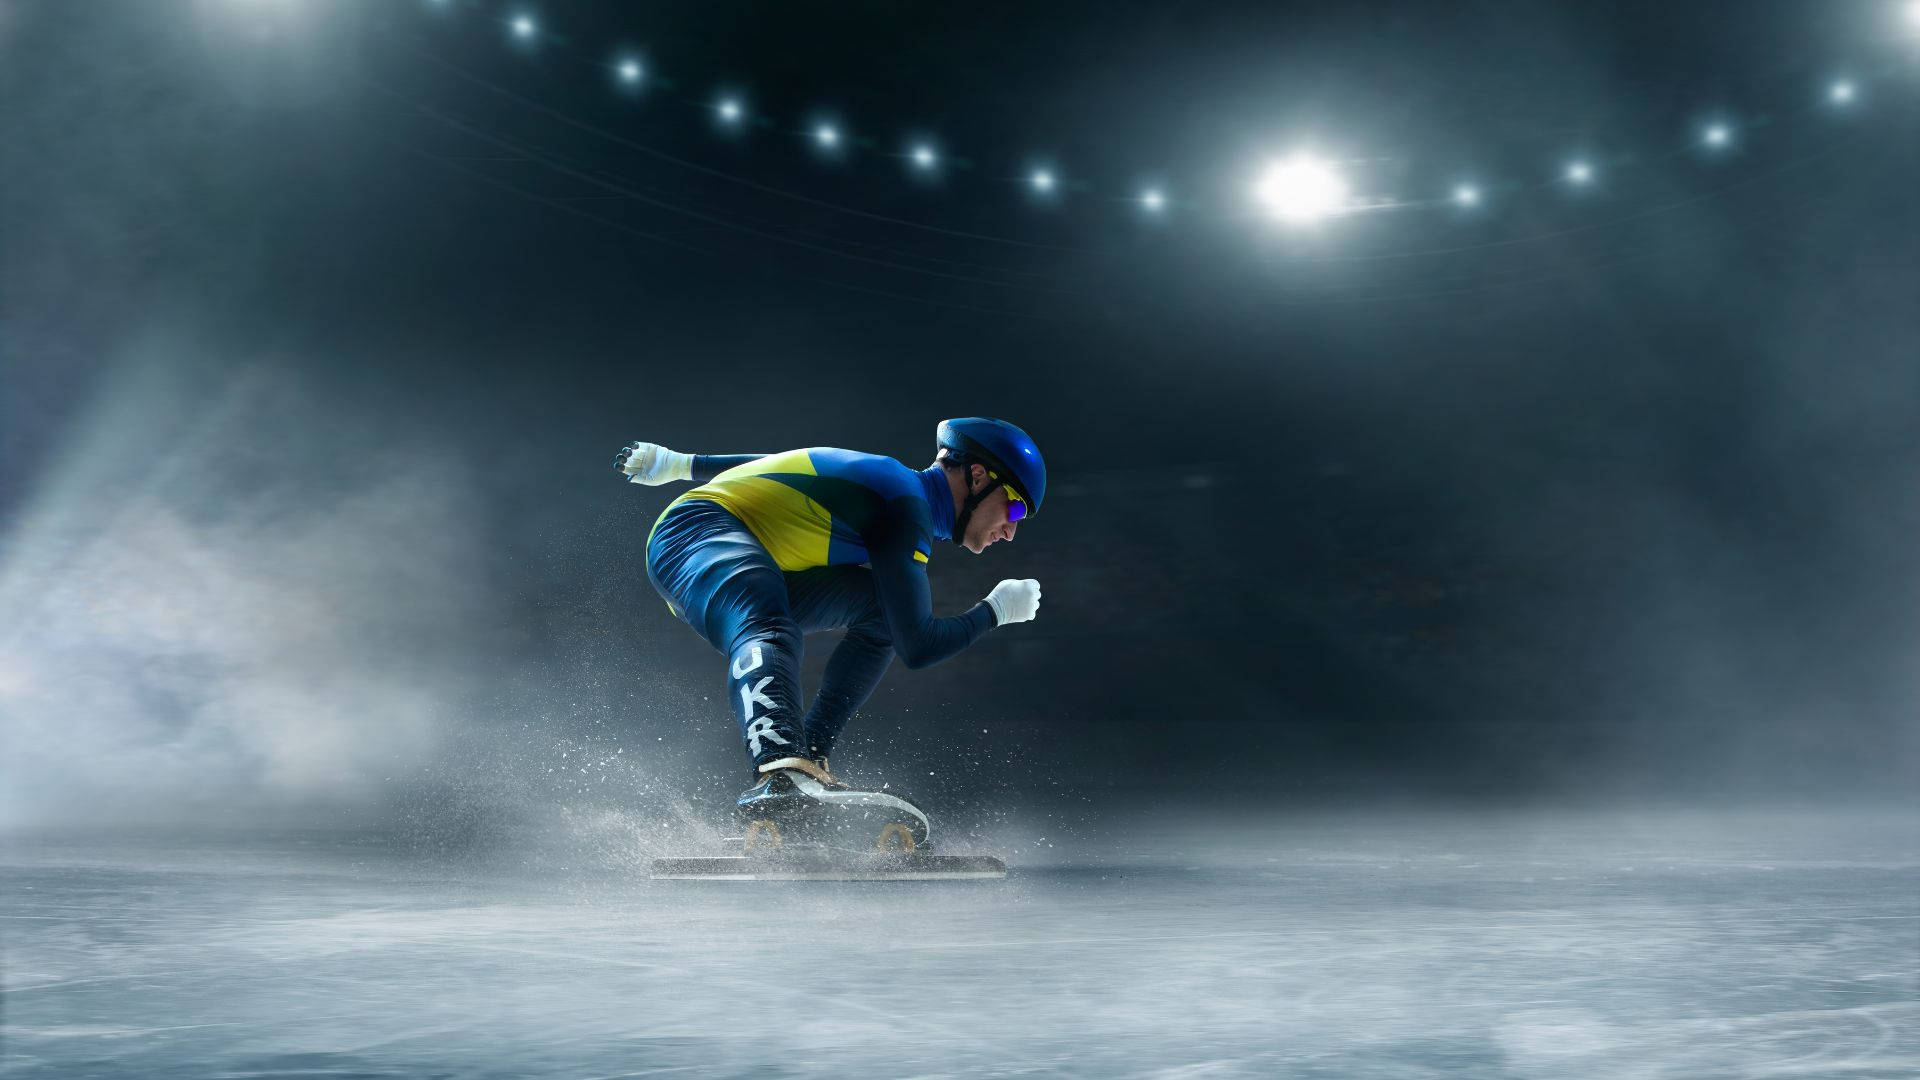 Speed Skating In The Ice Arena Wallpaper